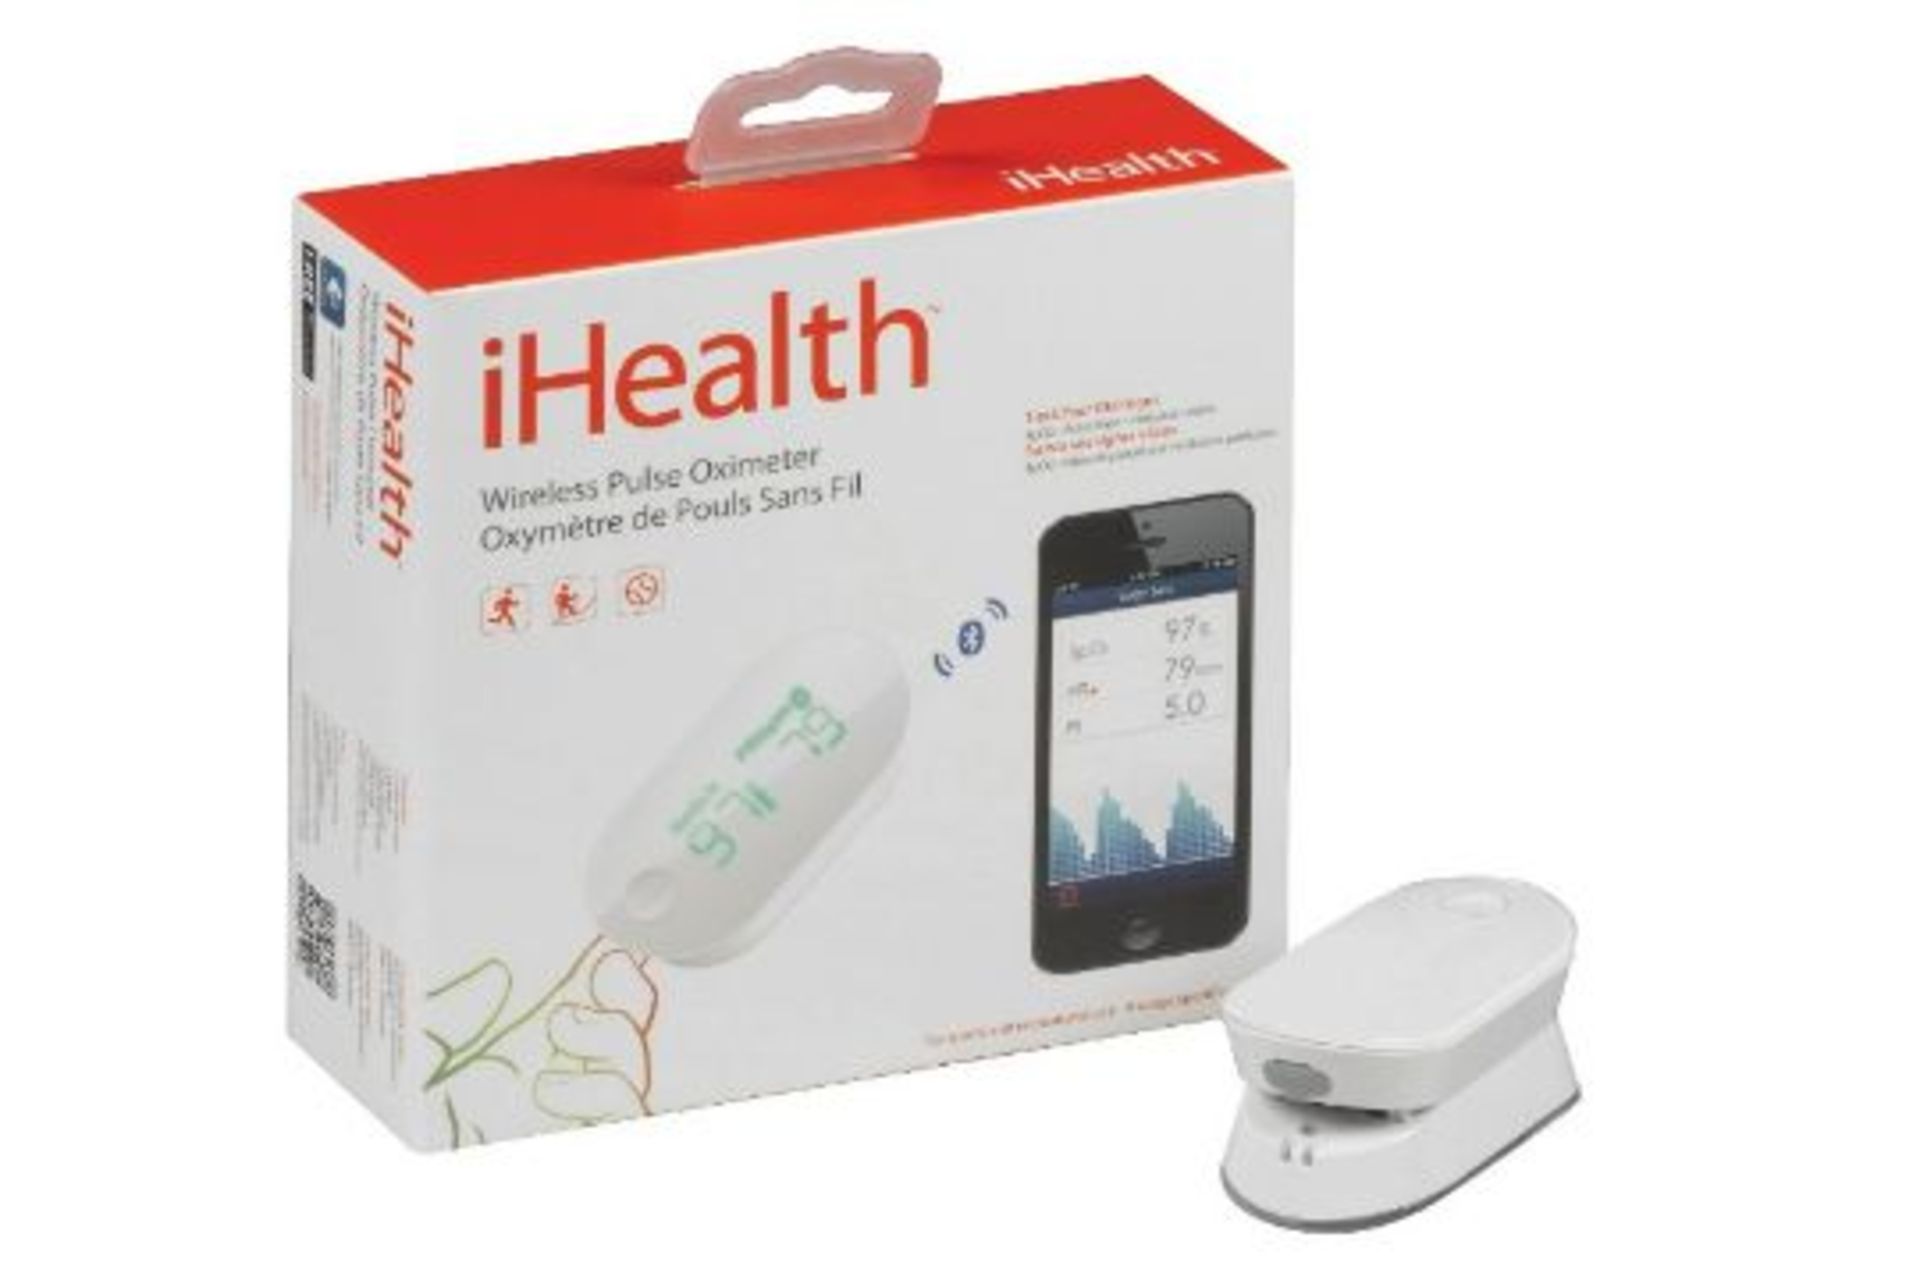 4 x NEW & BOXED iHealth Air Pulse Oximeter. RRP £75 EACH. Accurately measure your blood oxygen